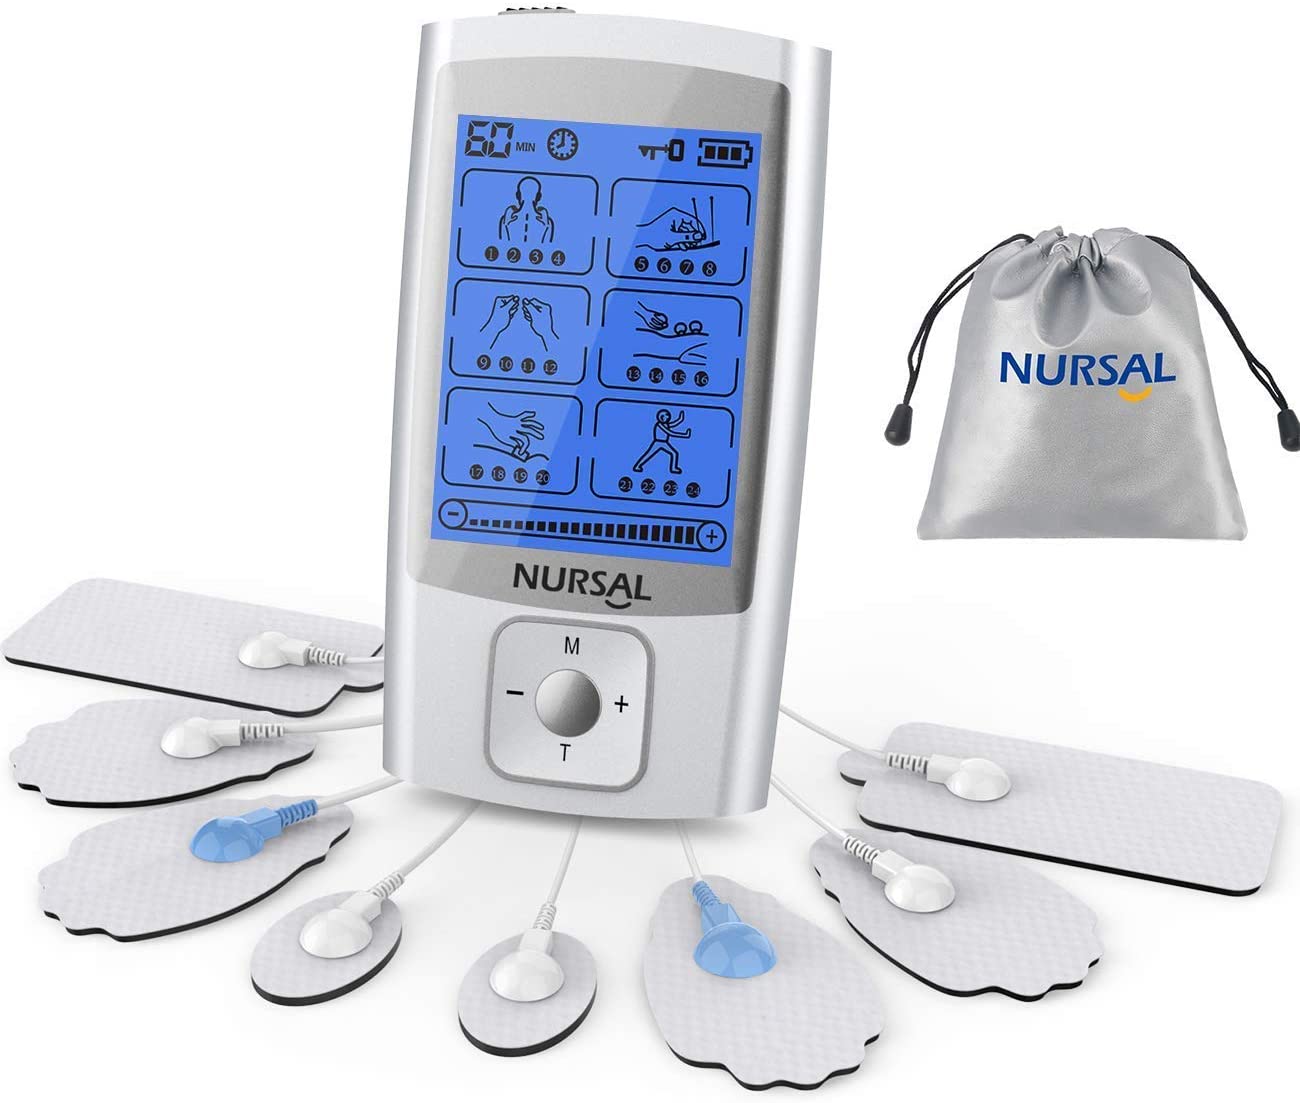 Easy@Home Rechargeable TENS Unit Muscle Stimulator, Electric Pain reli